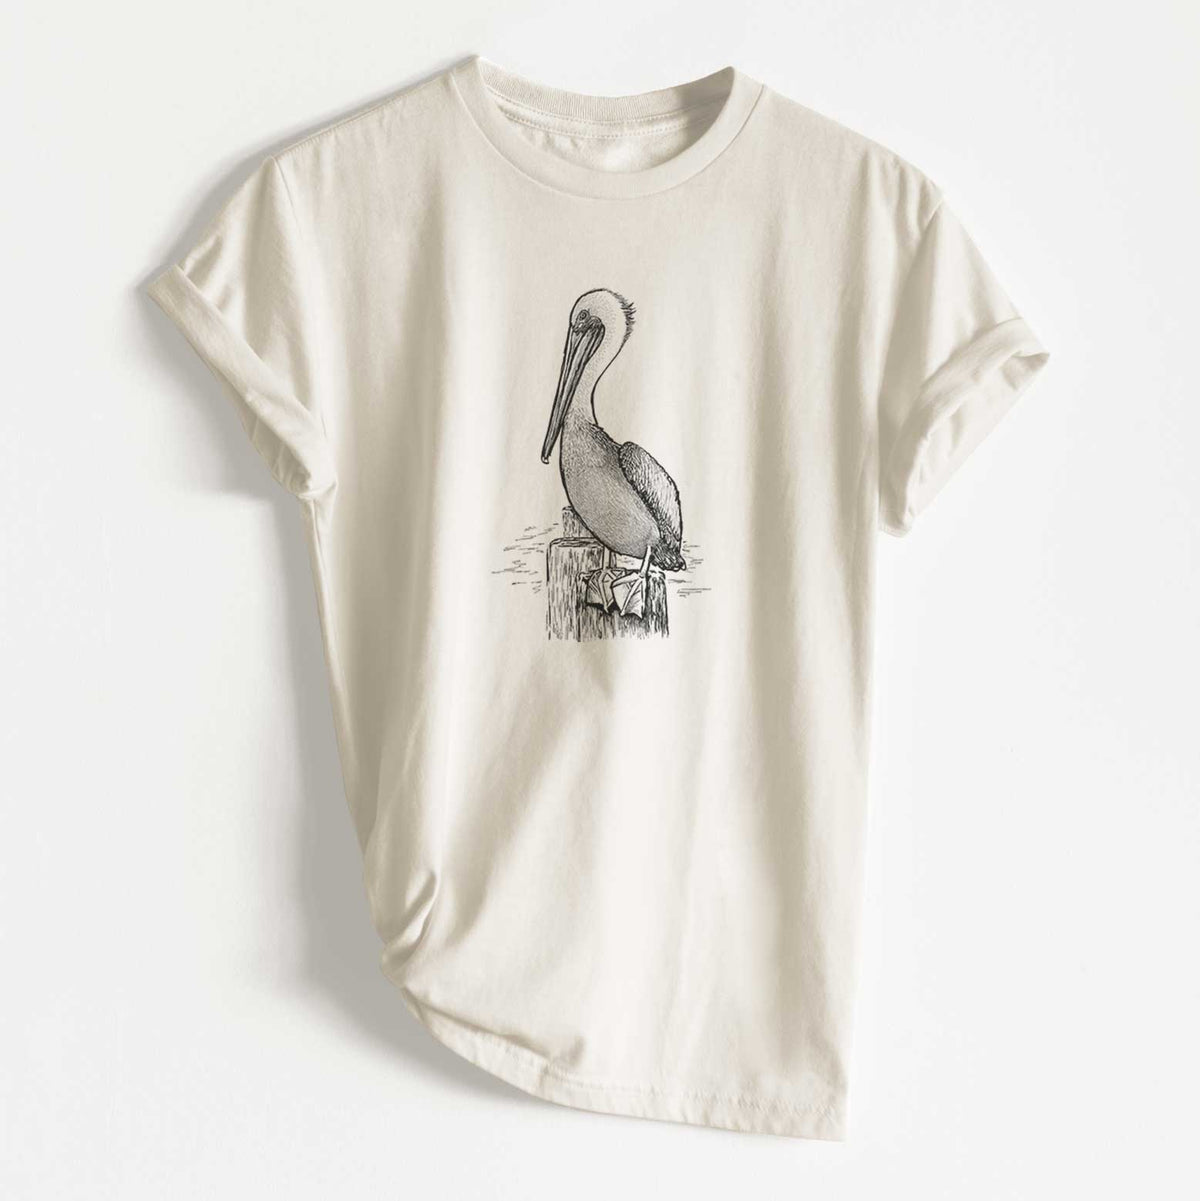 Pelecanus occidentalis - Brown Pelican - Unisex Recycled Eco Tee  - CLOSEOUT - FINAL SALE